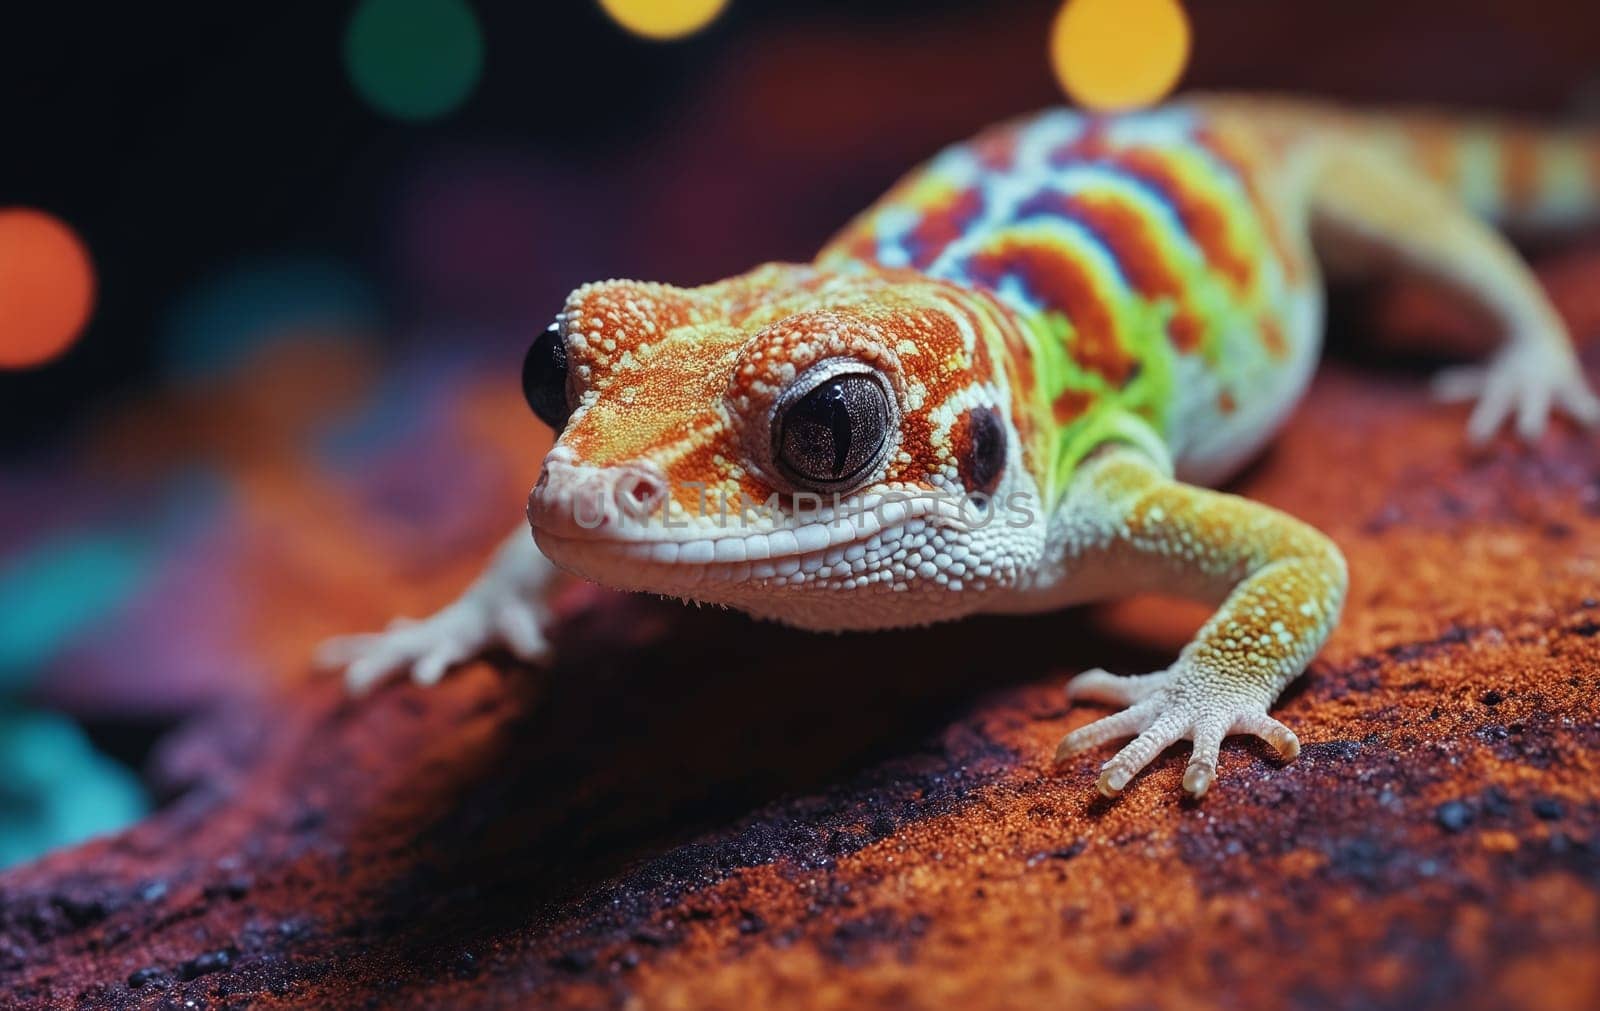 A vibrant Iguania lizard, a terrestrial animal and a scaled reptile, is perched on a rock in this macro photography shot. The colorful organism resembles a chameleon